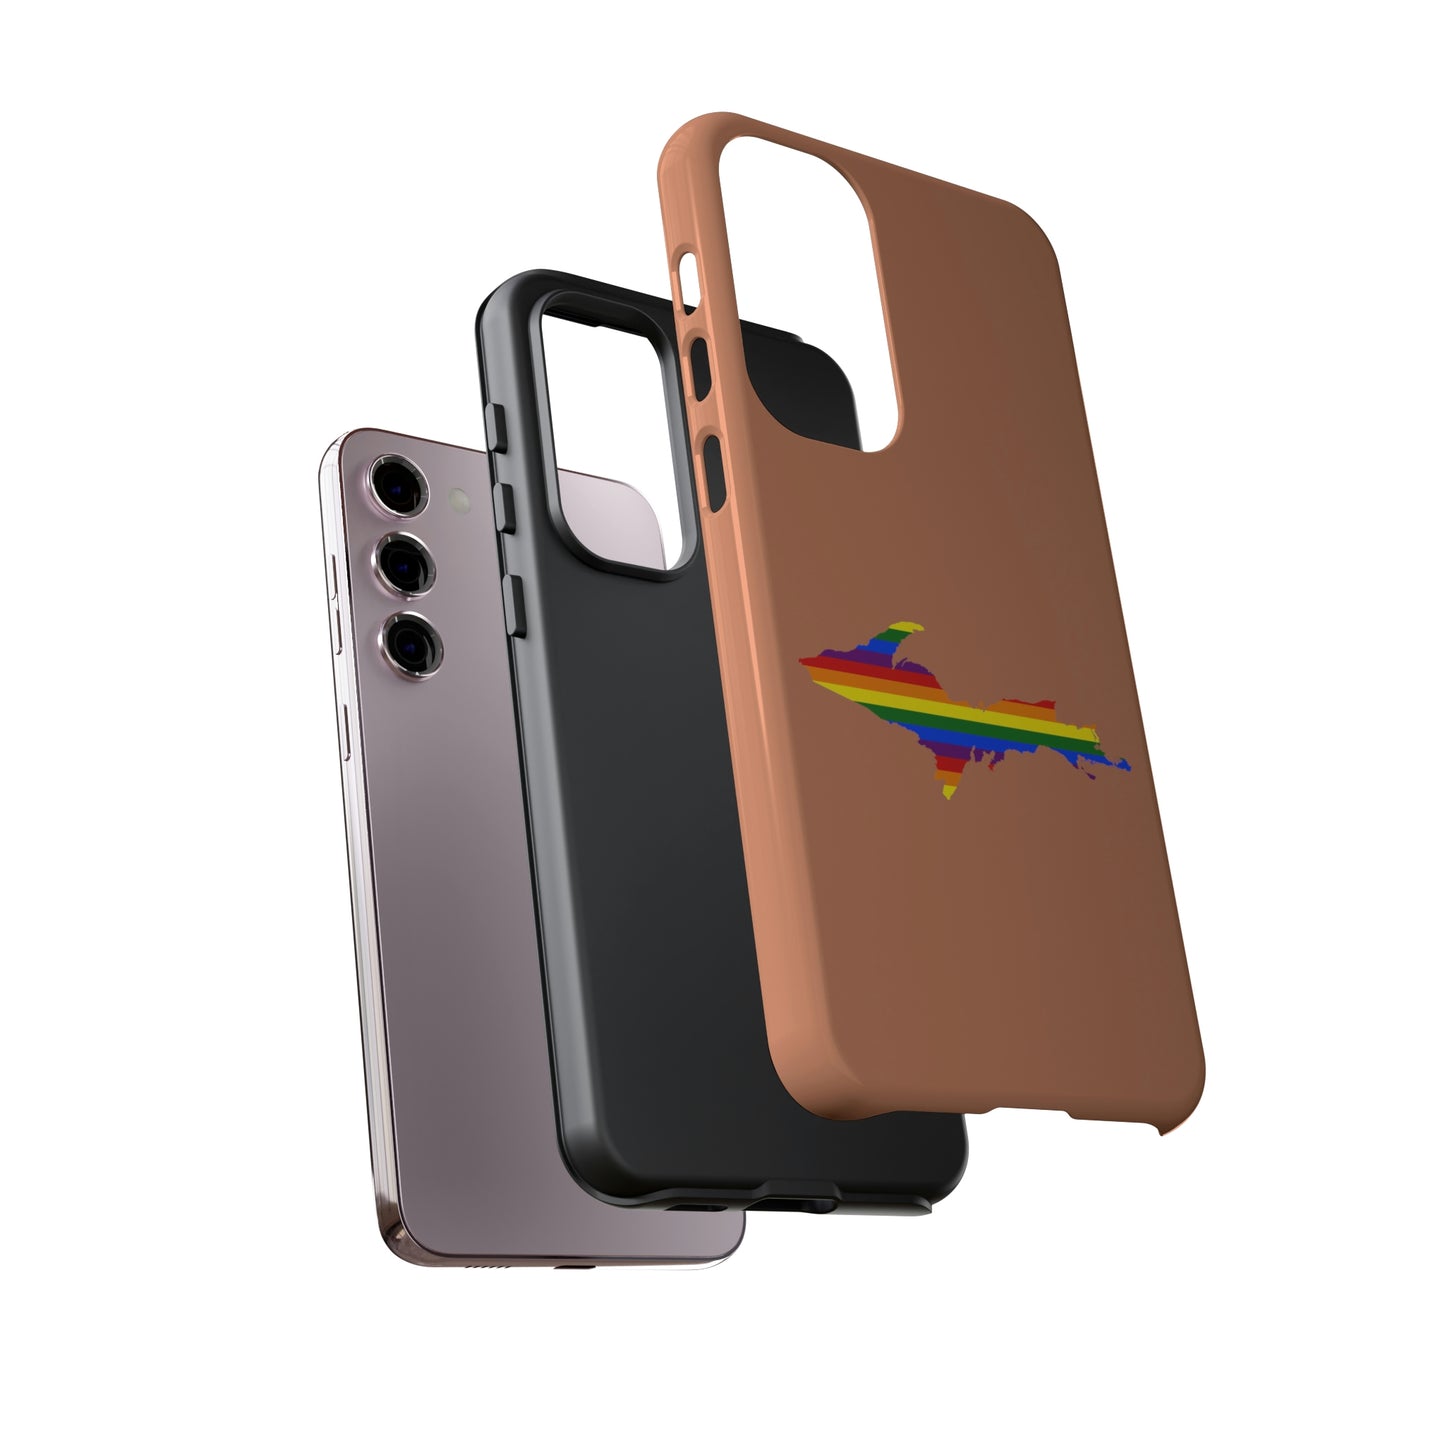 Michigan Upper Peninsula Tough Phone Case (Copper Color w/ UP Pride Flag Outline) | Samsung & Pixel Android